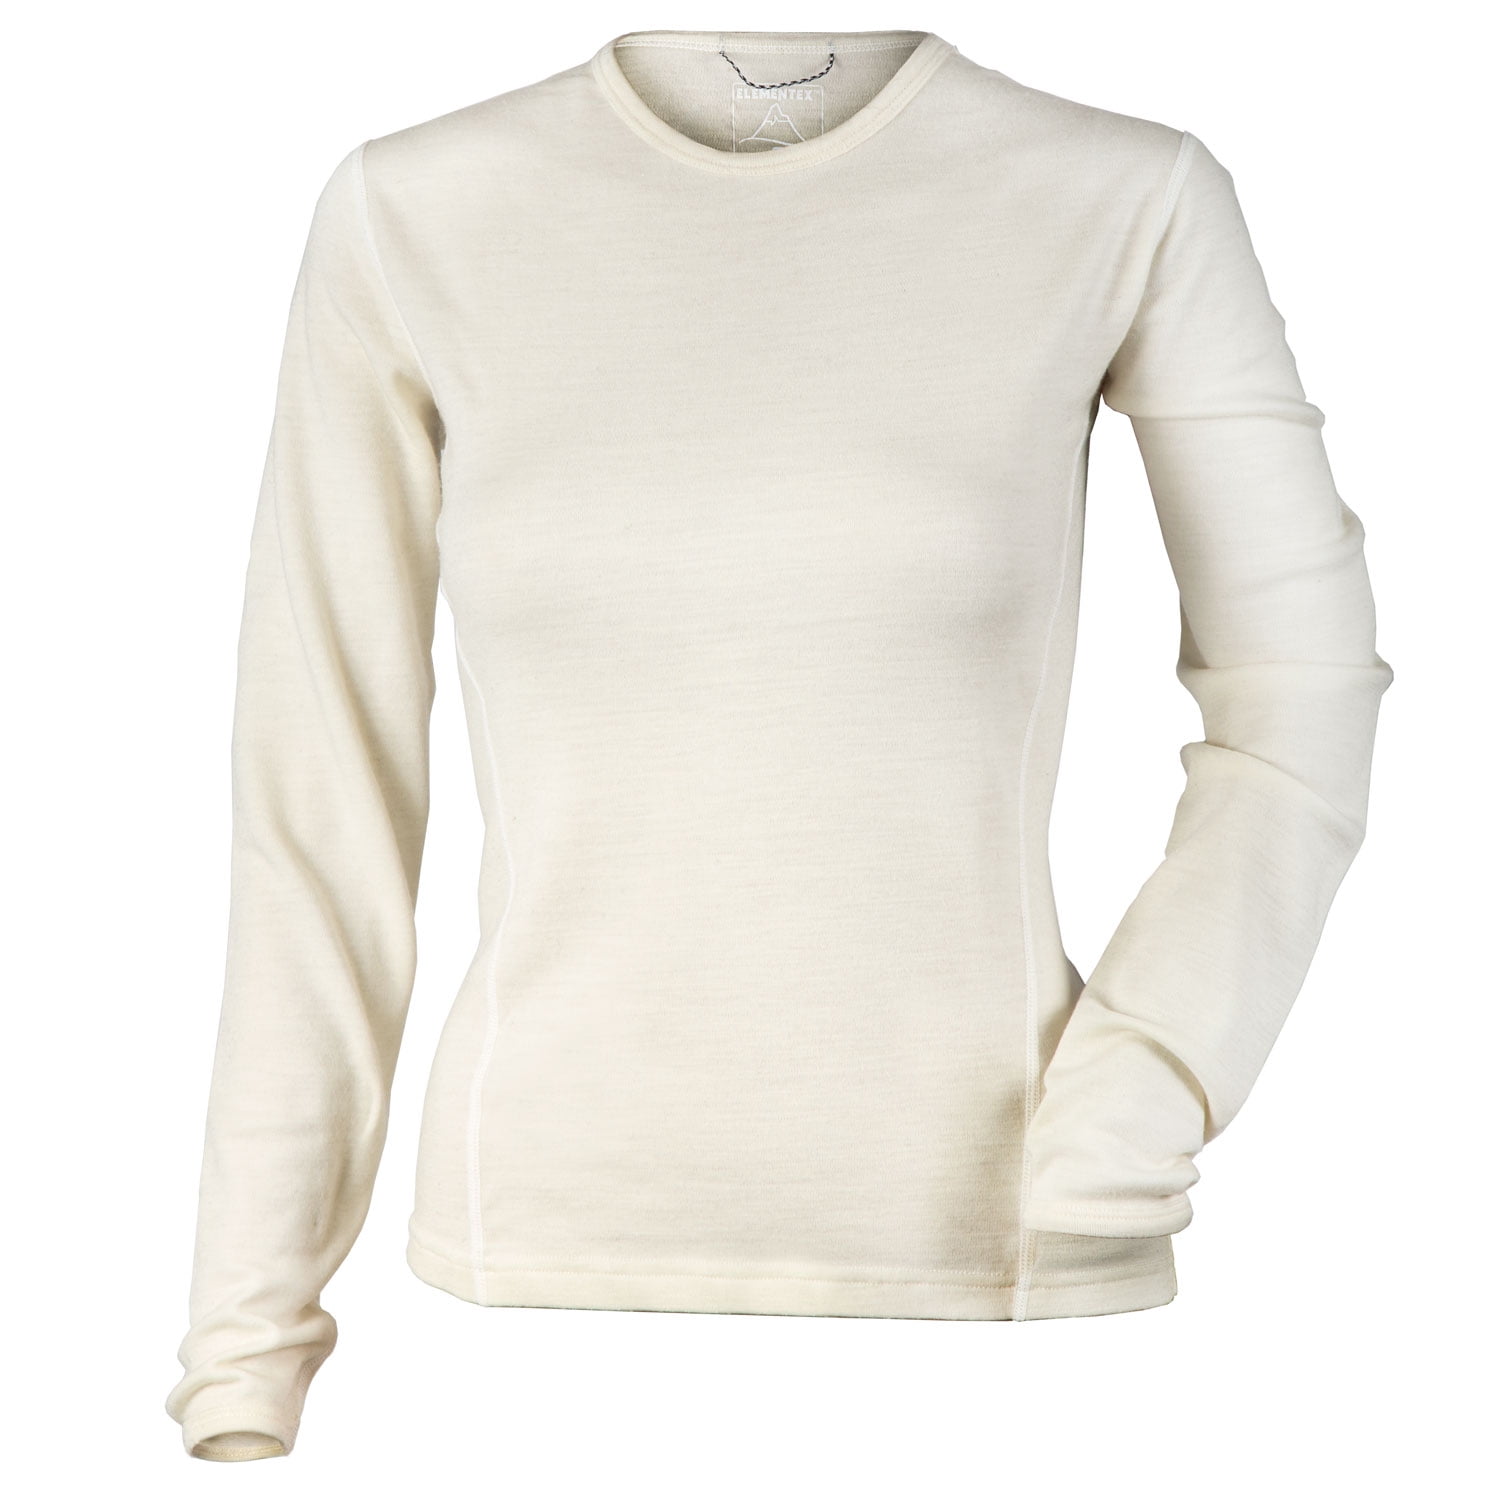 Made in USA Moisture Wicking Midweight Layer Details about   Men's French Terry Thermal Top 